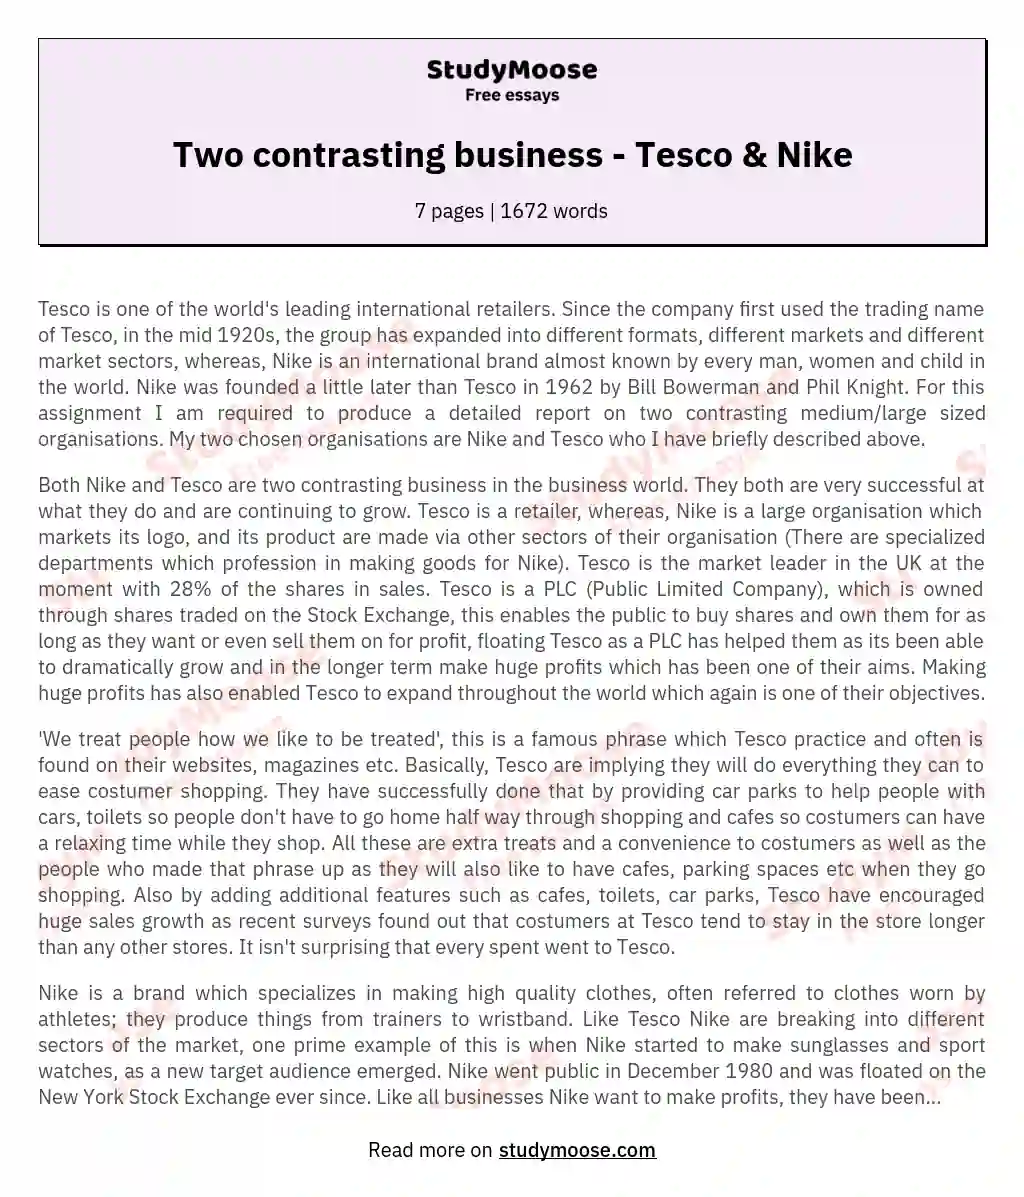 Two contrasting business - Tesco & Nike essay